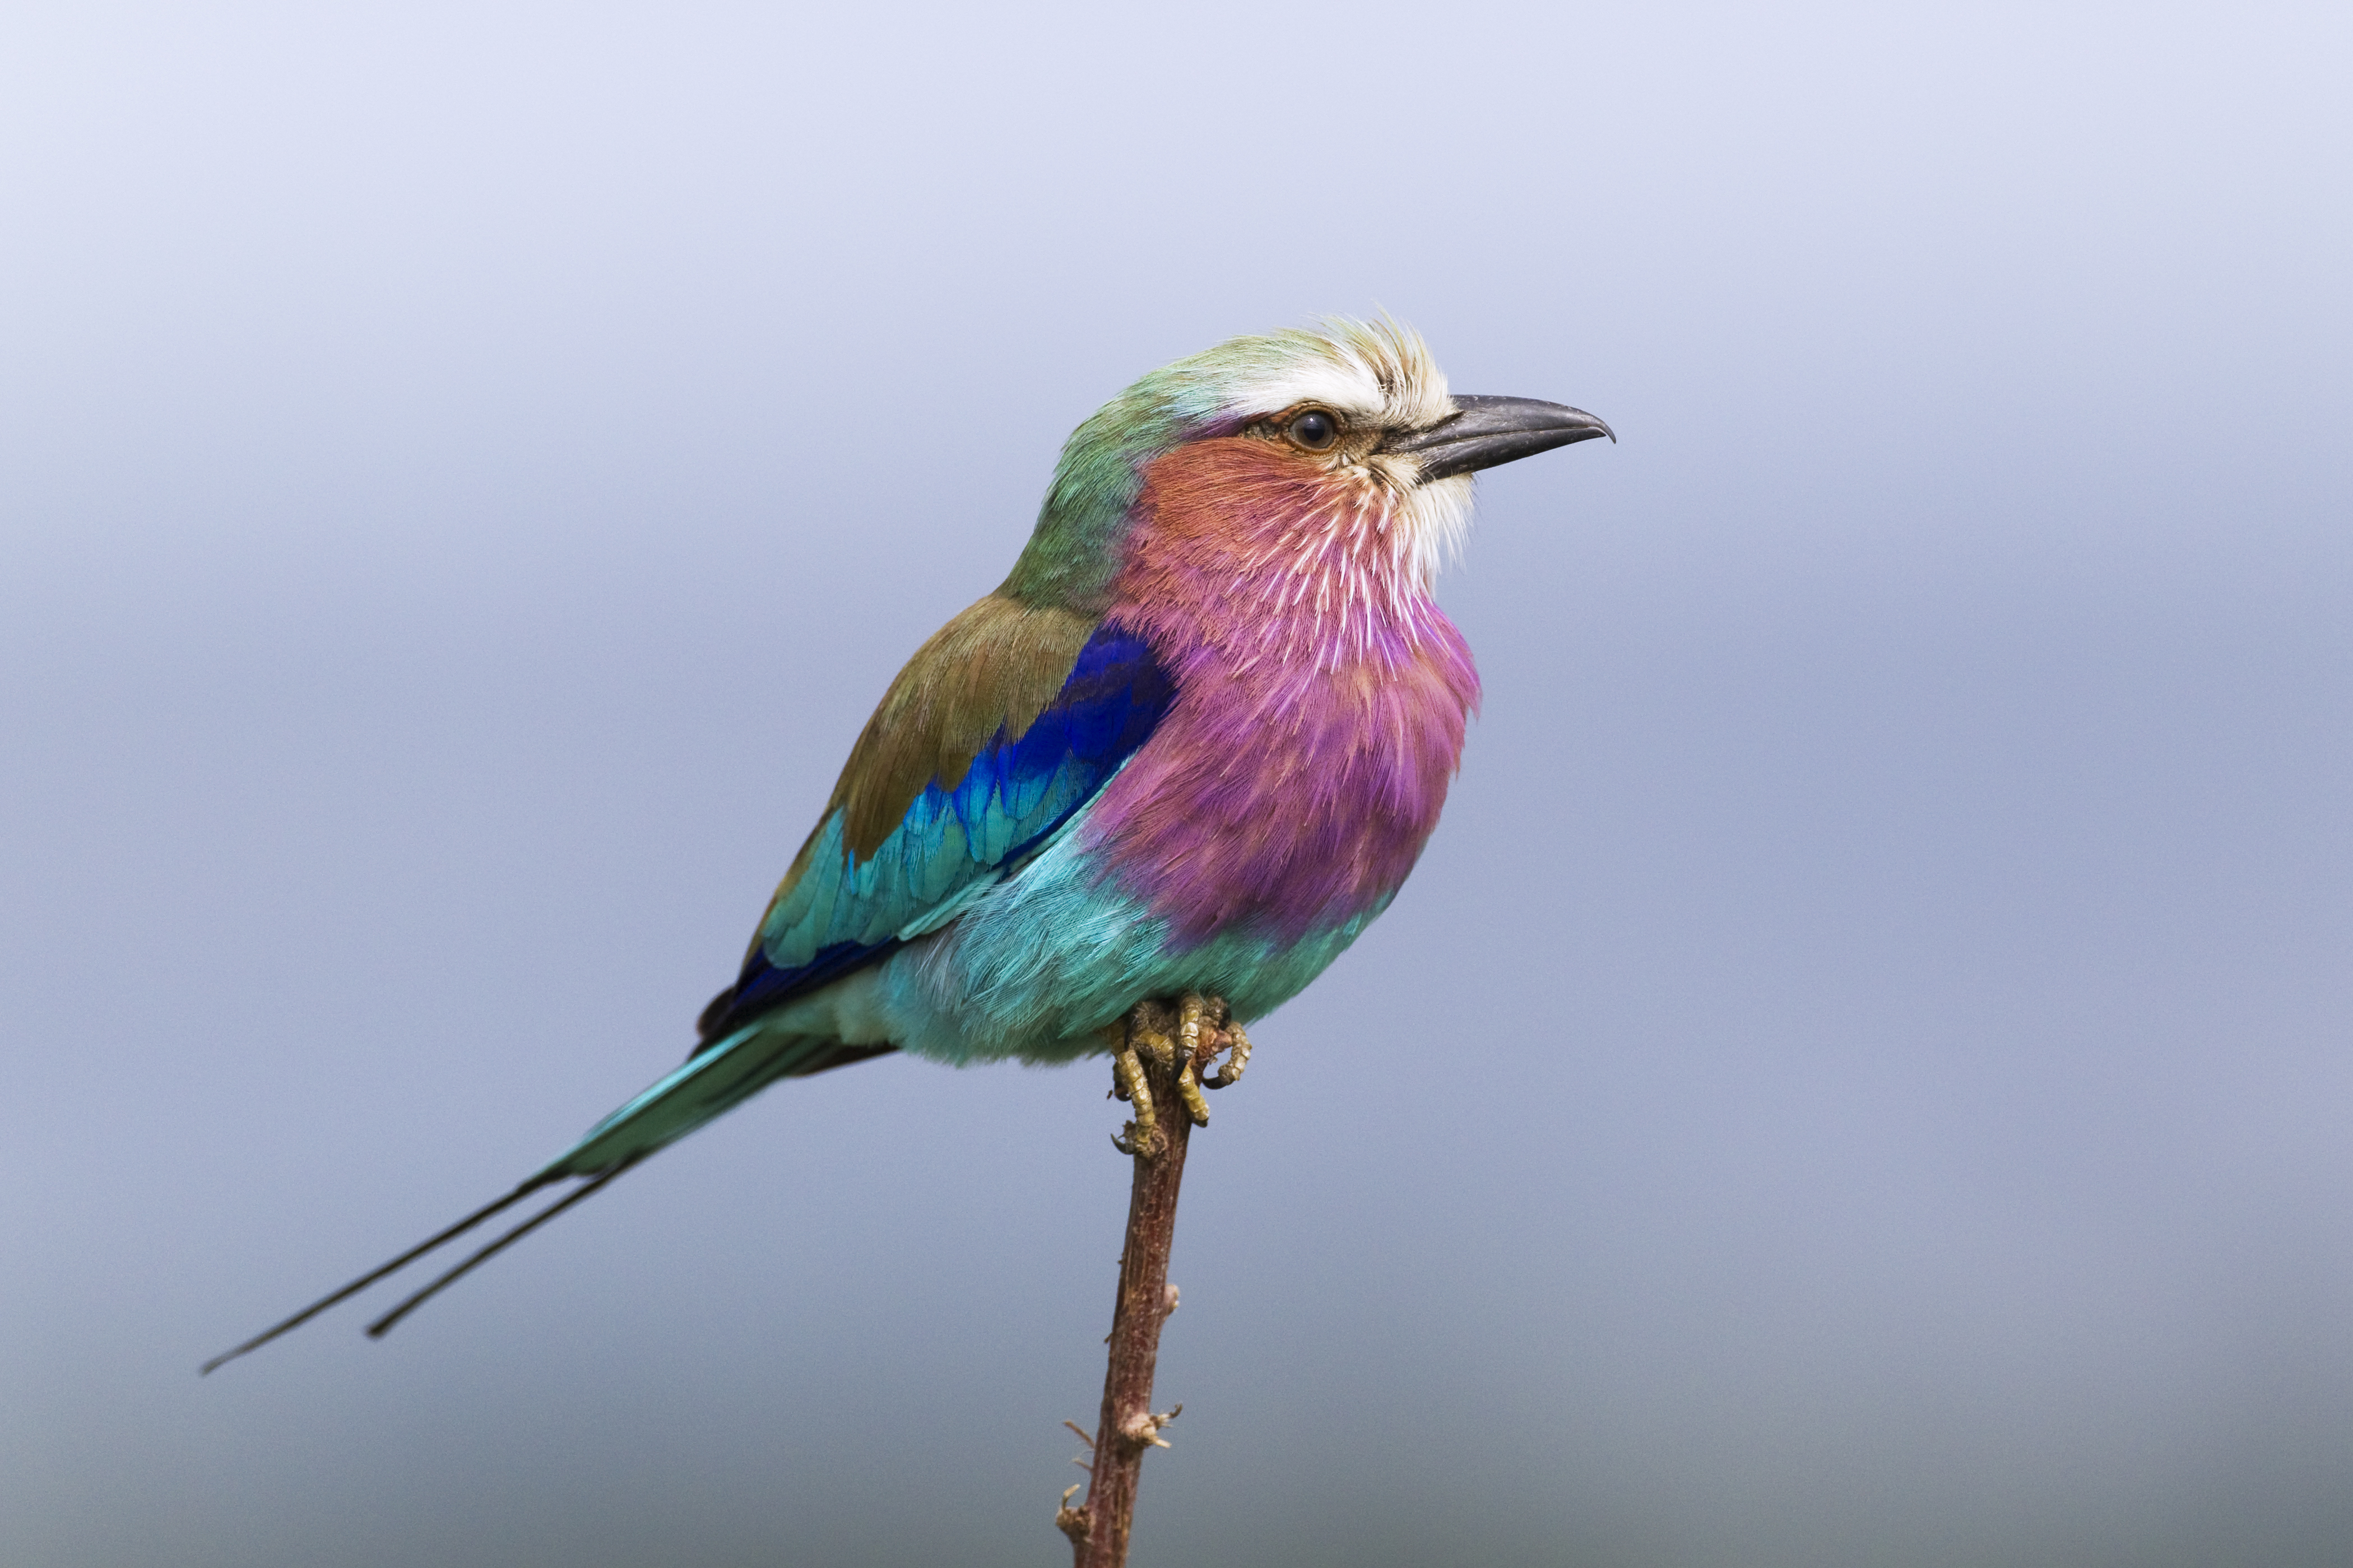 Lilac-breasted roller perched on a small branch in the evening in Masai Mara, Kenya